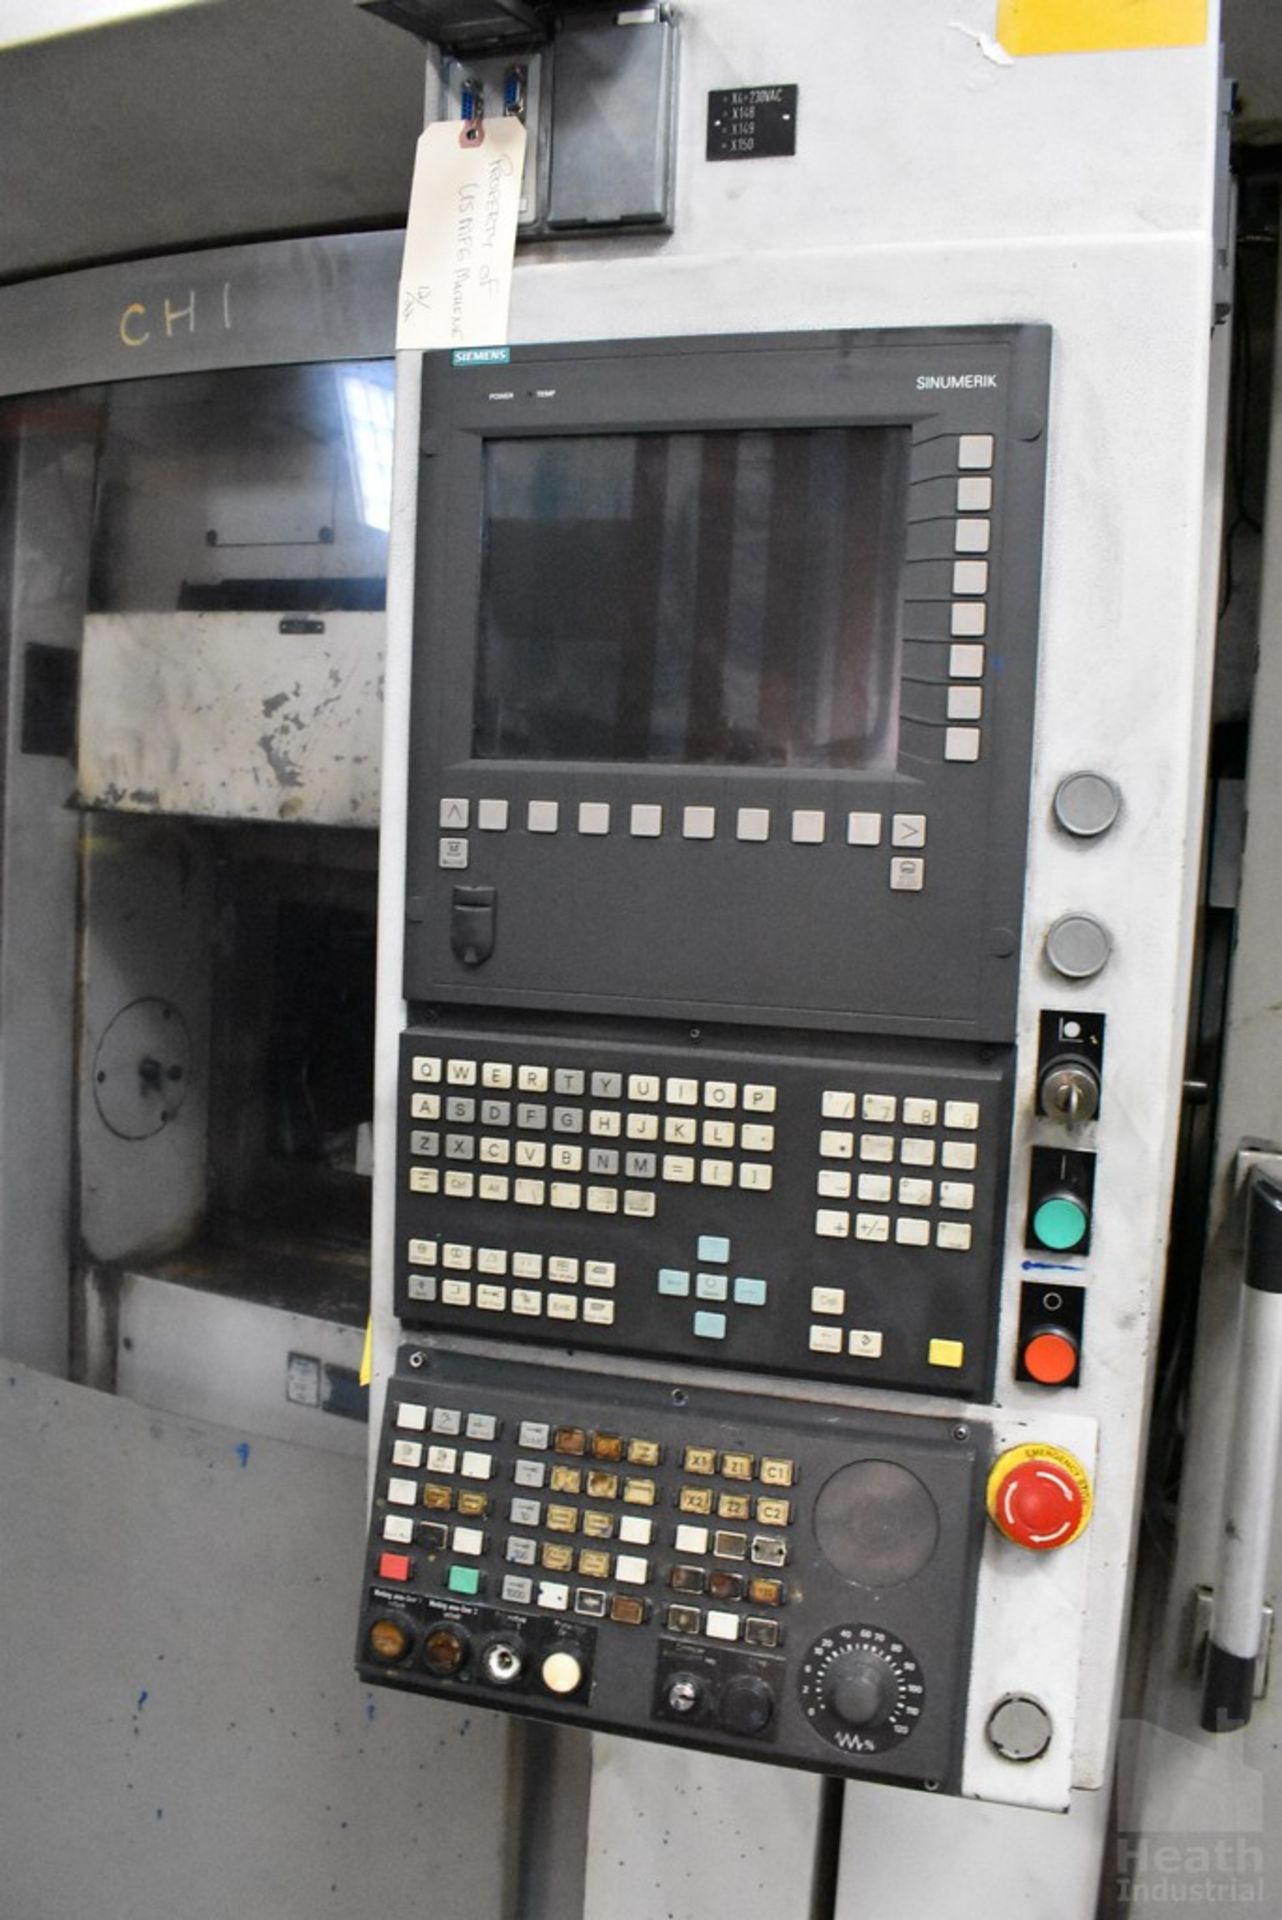 EMAG MODEL VSC400 DUO CNC TWIN SPINDLE VERTICAL PICK-UP TURNING MACHINE, S/N M736-72444 (NEW - Image 6 of 11